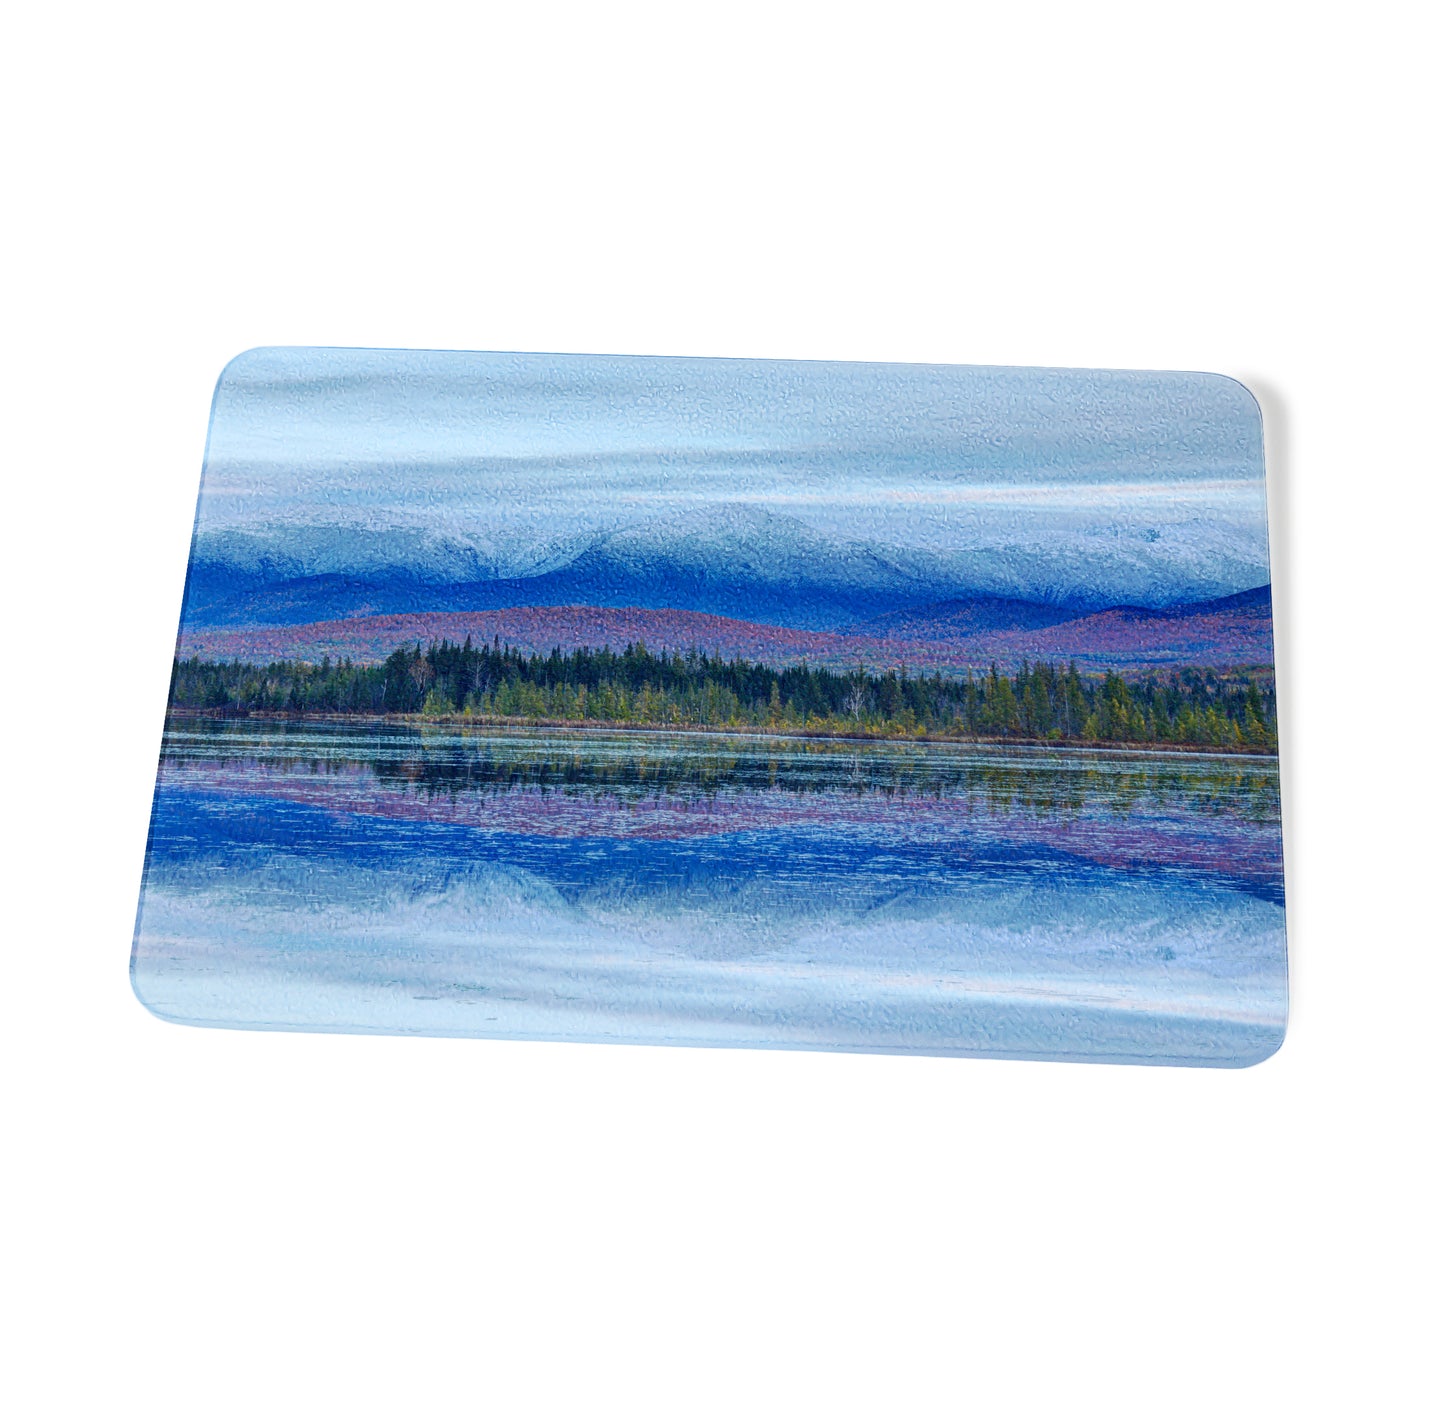 First Snow from Cherry Pond Cutting Board by Chris Whiton